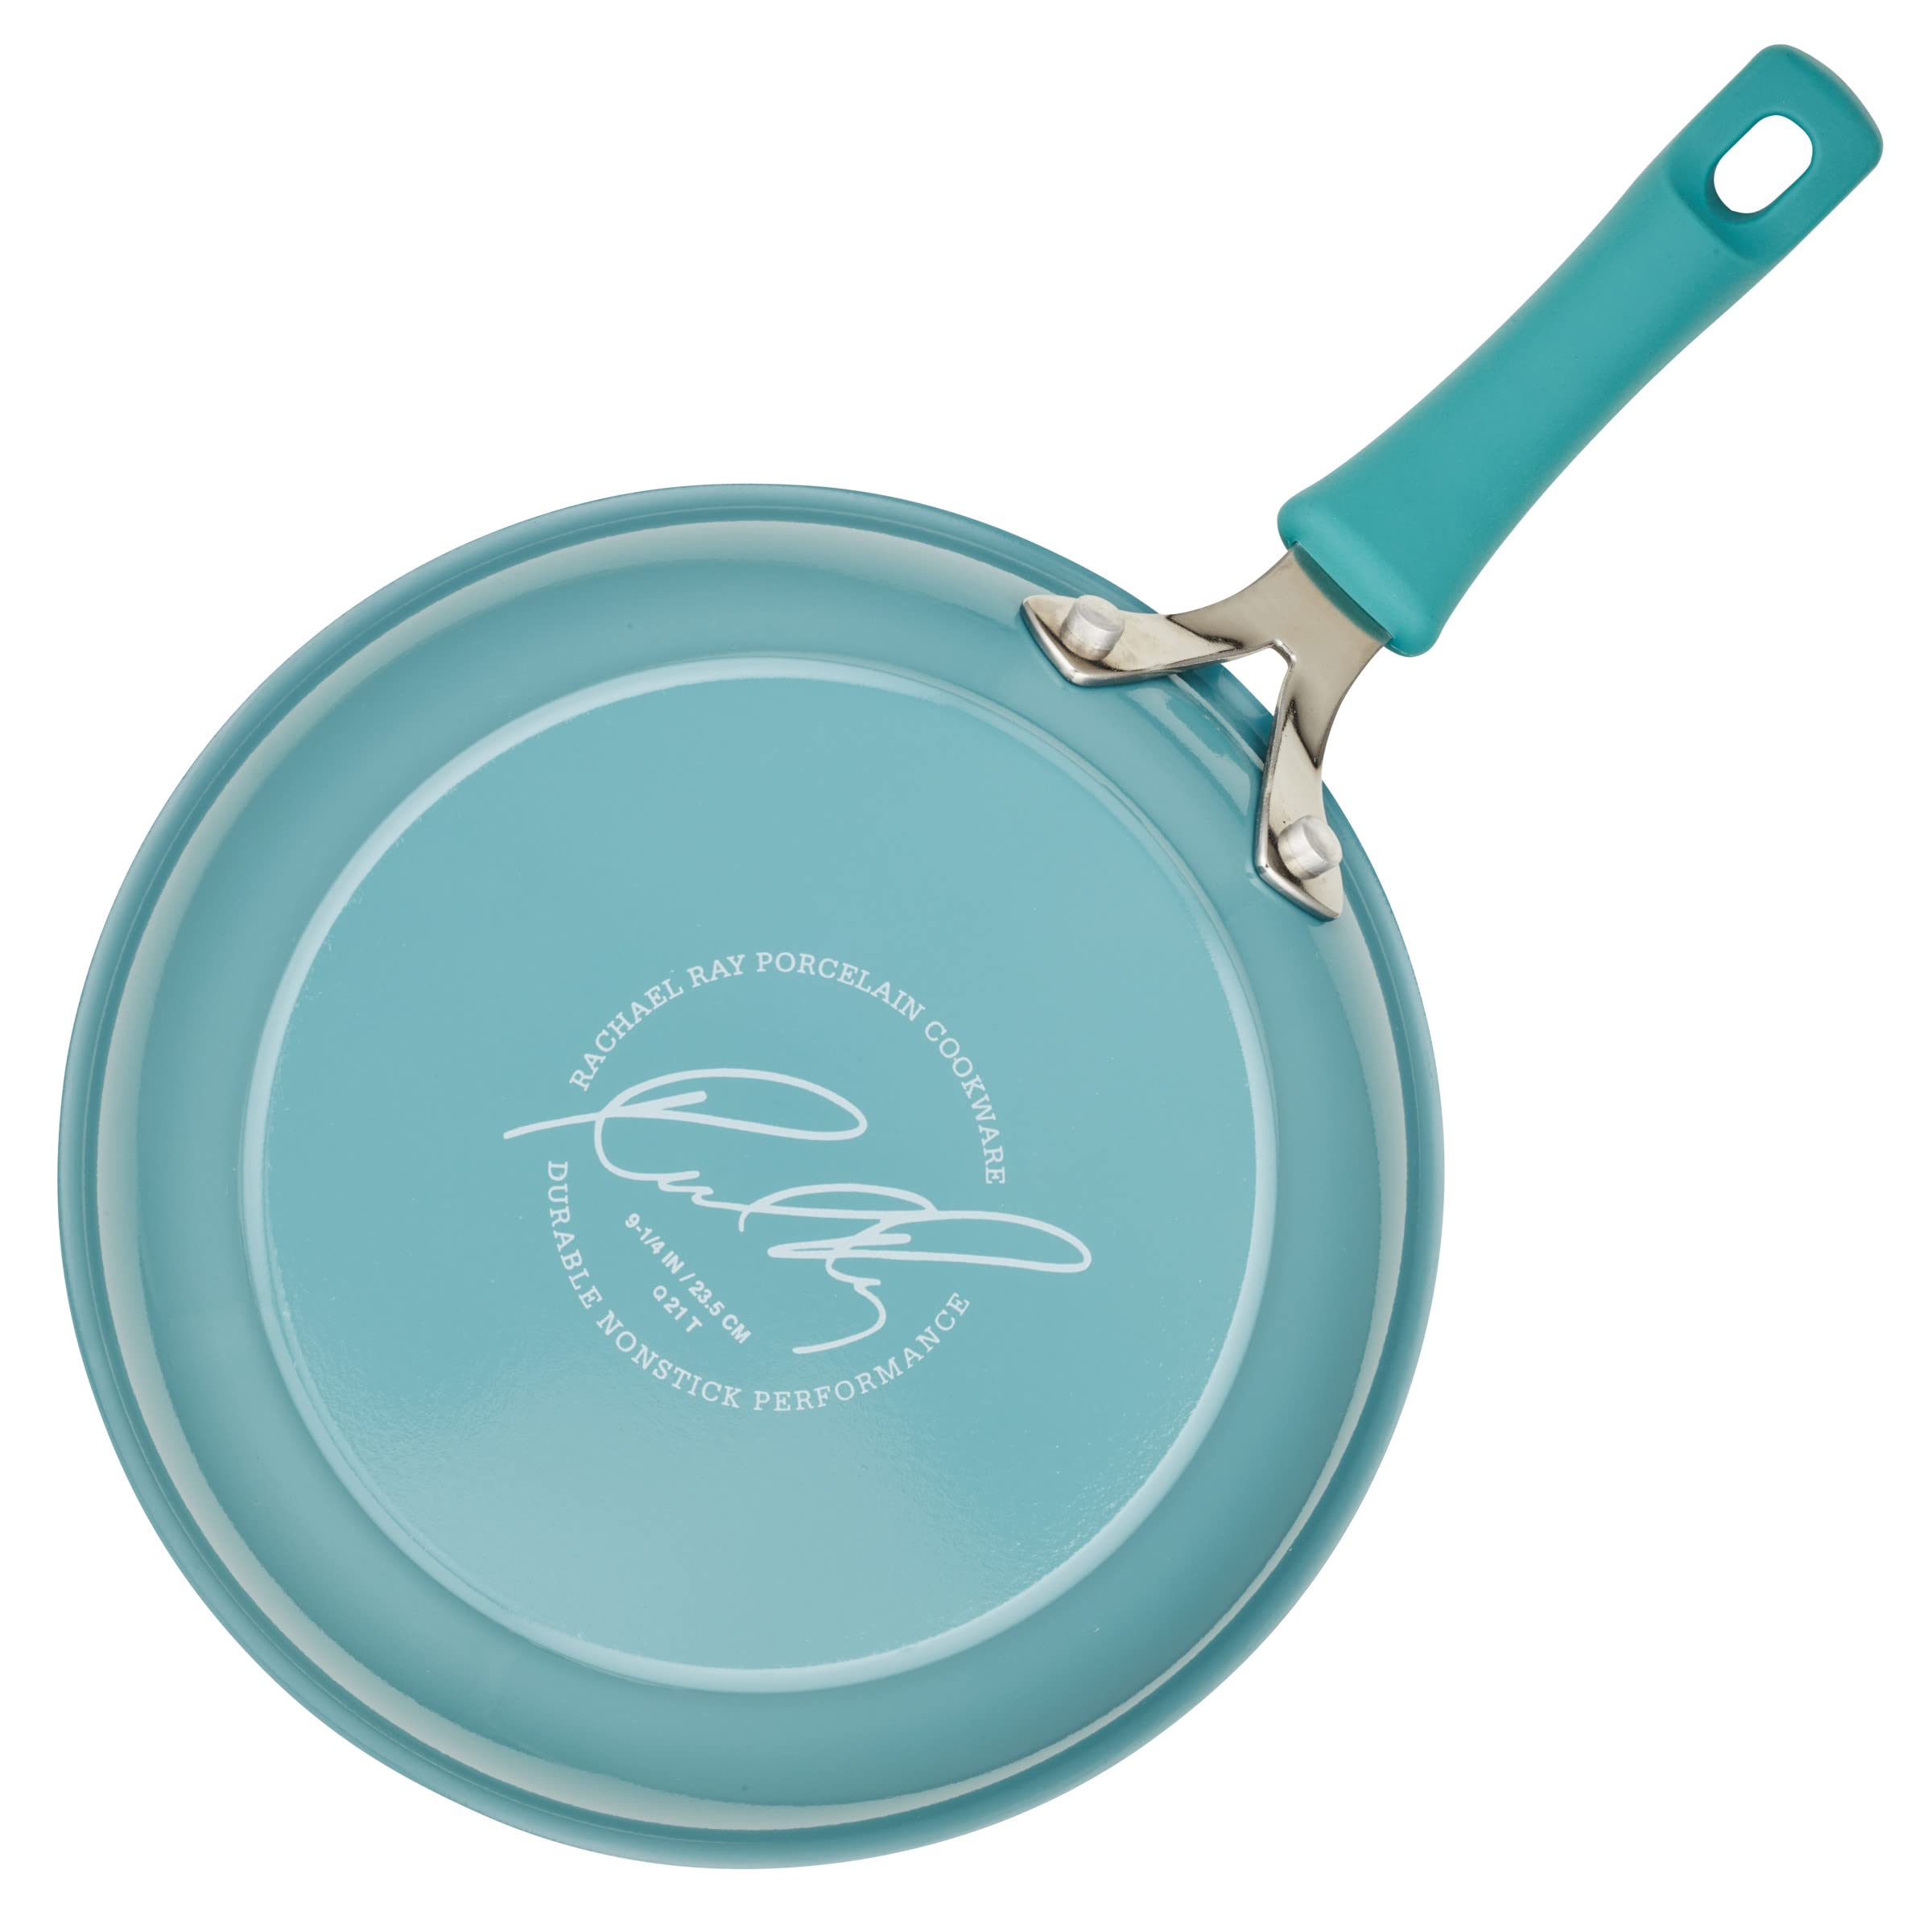 Rachael Ray Cook + Create Nonstick Frying Pans/Skillet Set, 9.5 Inch and 11.75 Inch, Agave Blue